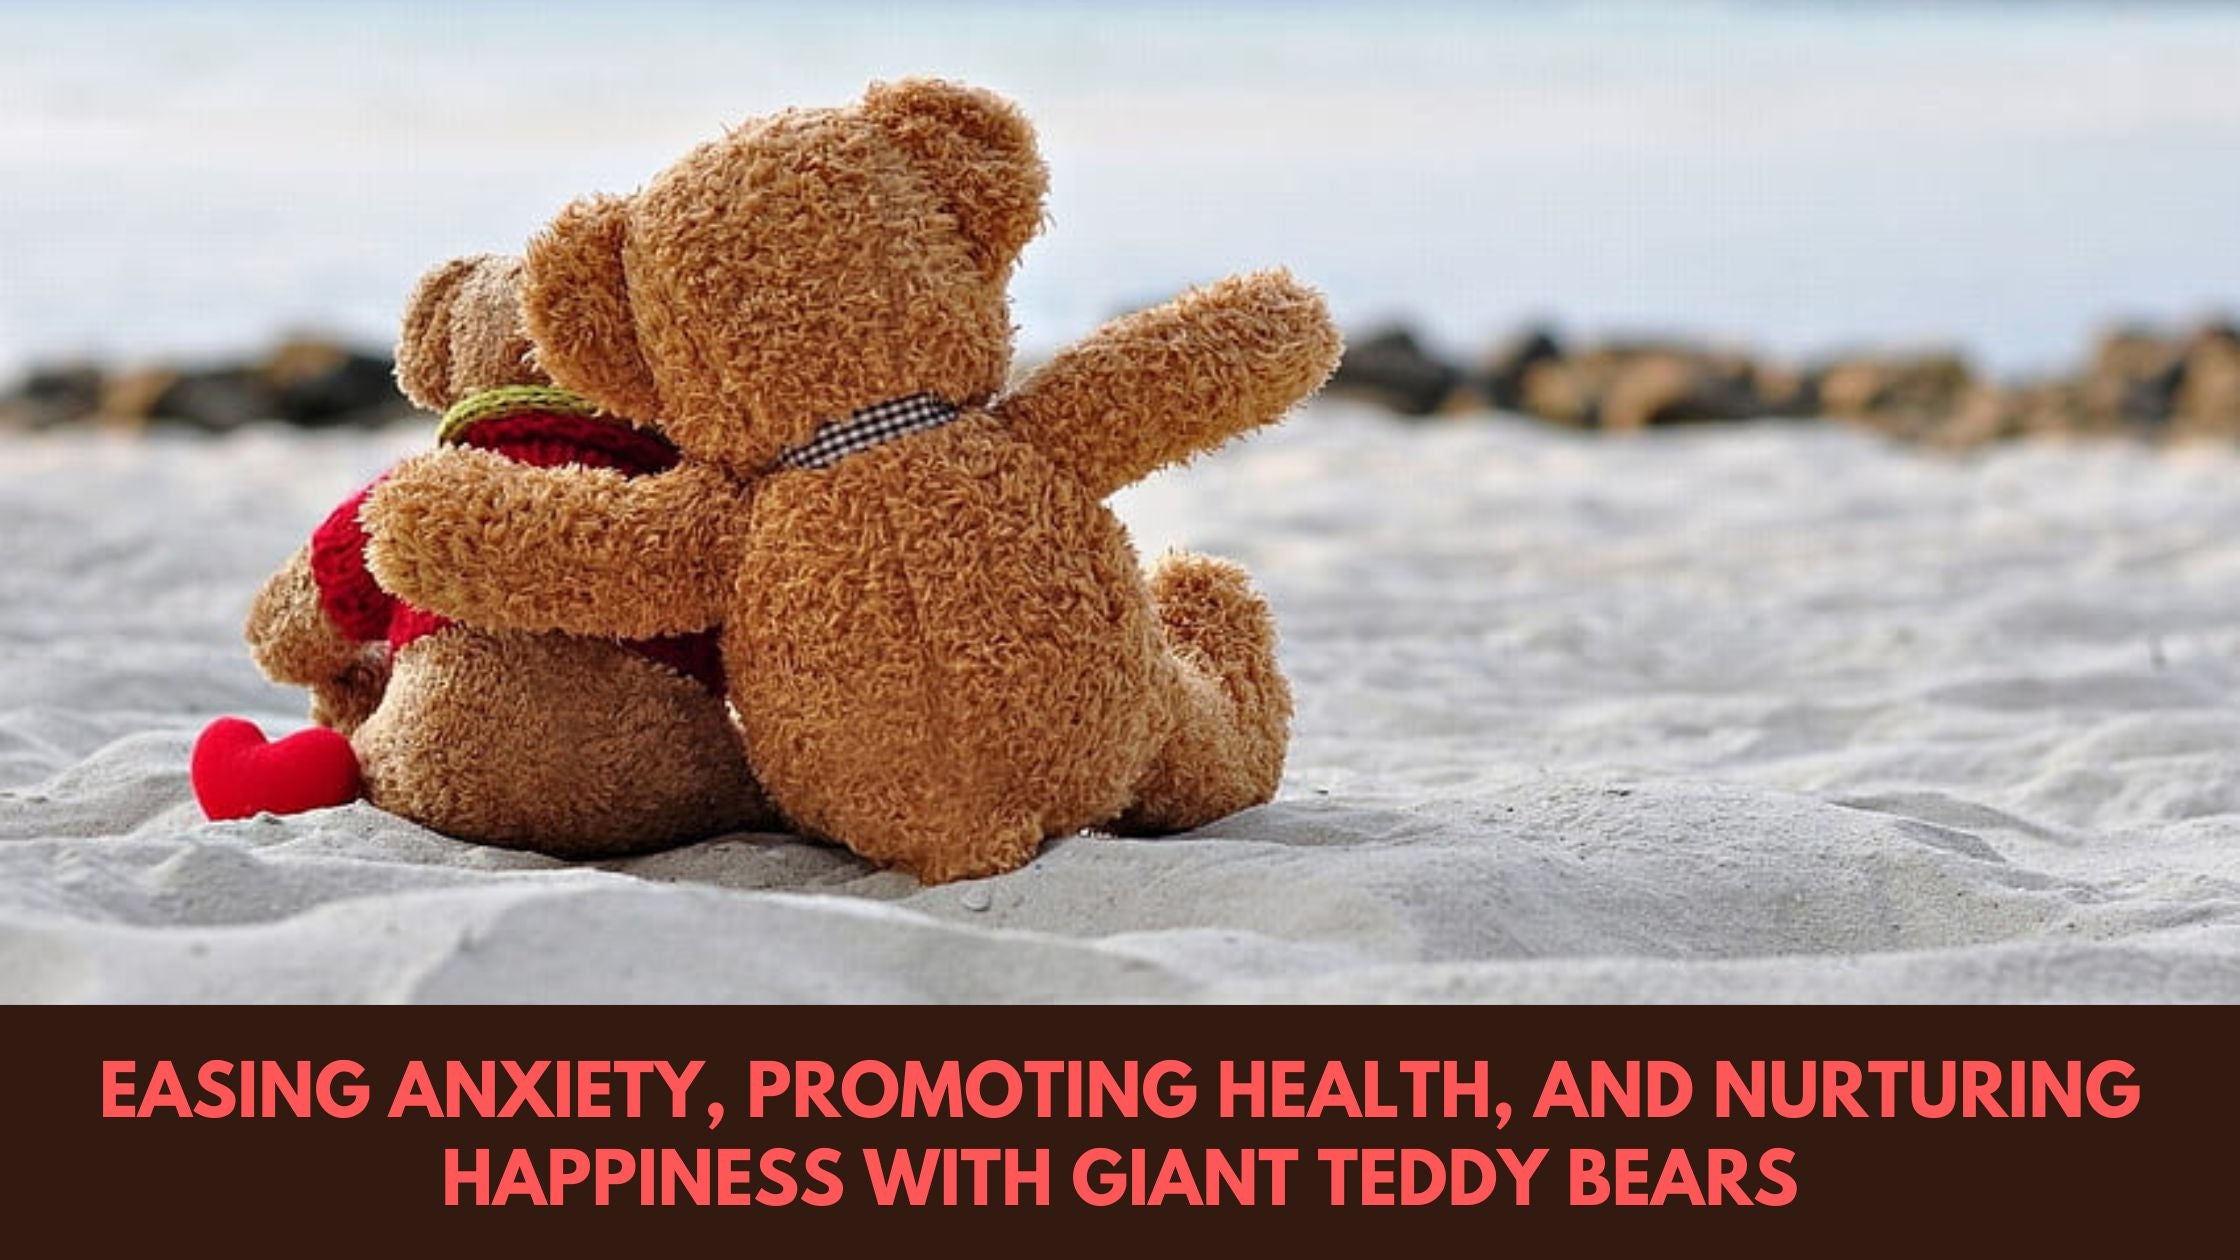 Giant teddy bear for Happiness